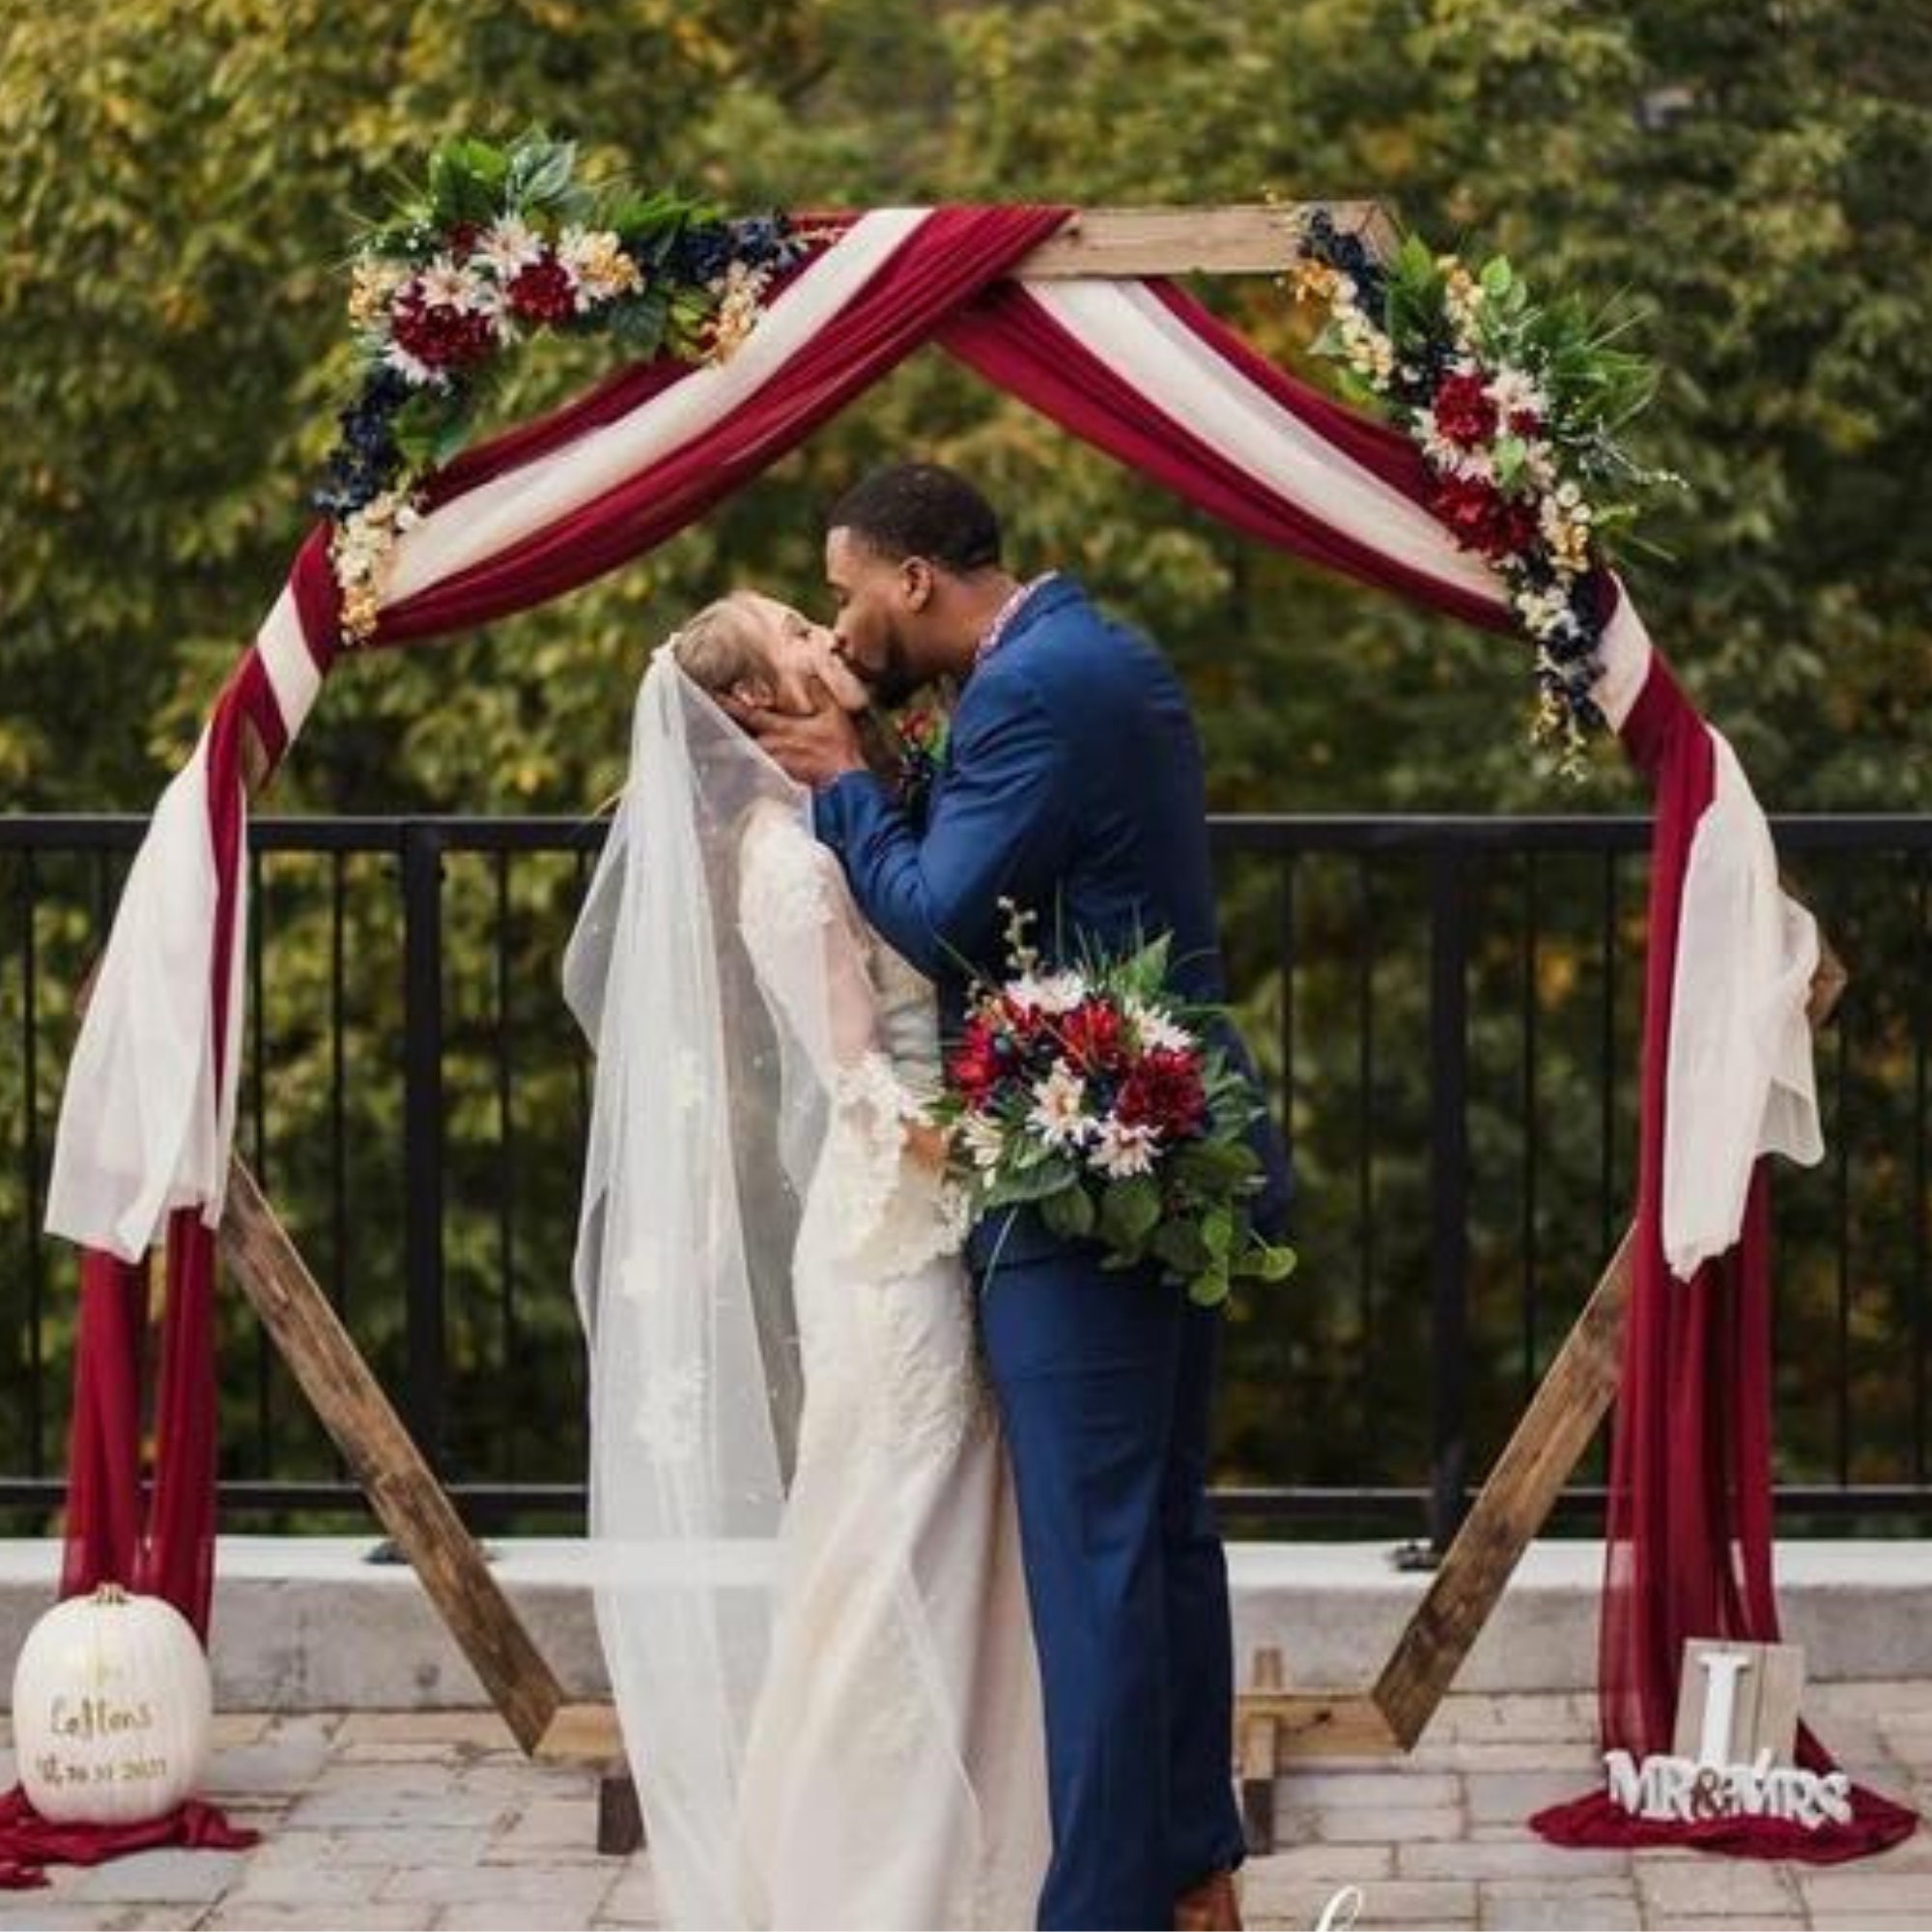 Heptagonal Wooden Wedding Arch Drapes & Flowers Not Included 7 FT Wood Wedding Backdrop Arch Heptagon Arbor Altar Bridal Background Decoration for Outdoor Ceremony Birthday Party Memorial Day 